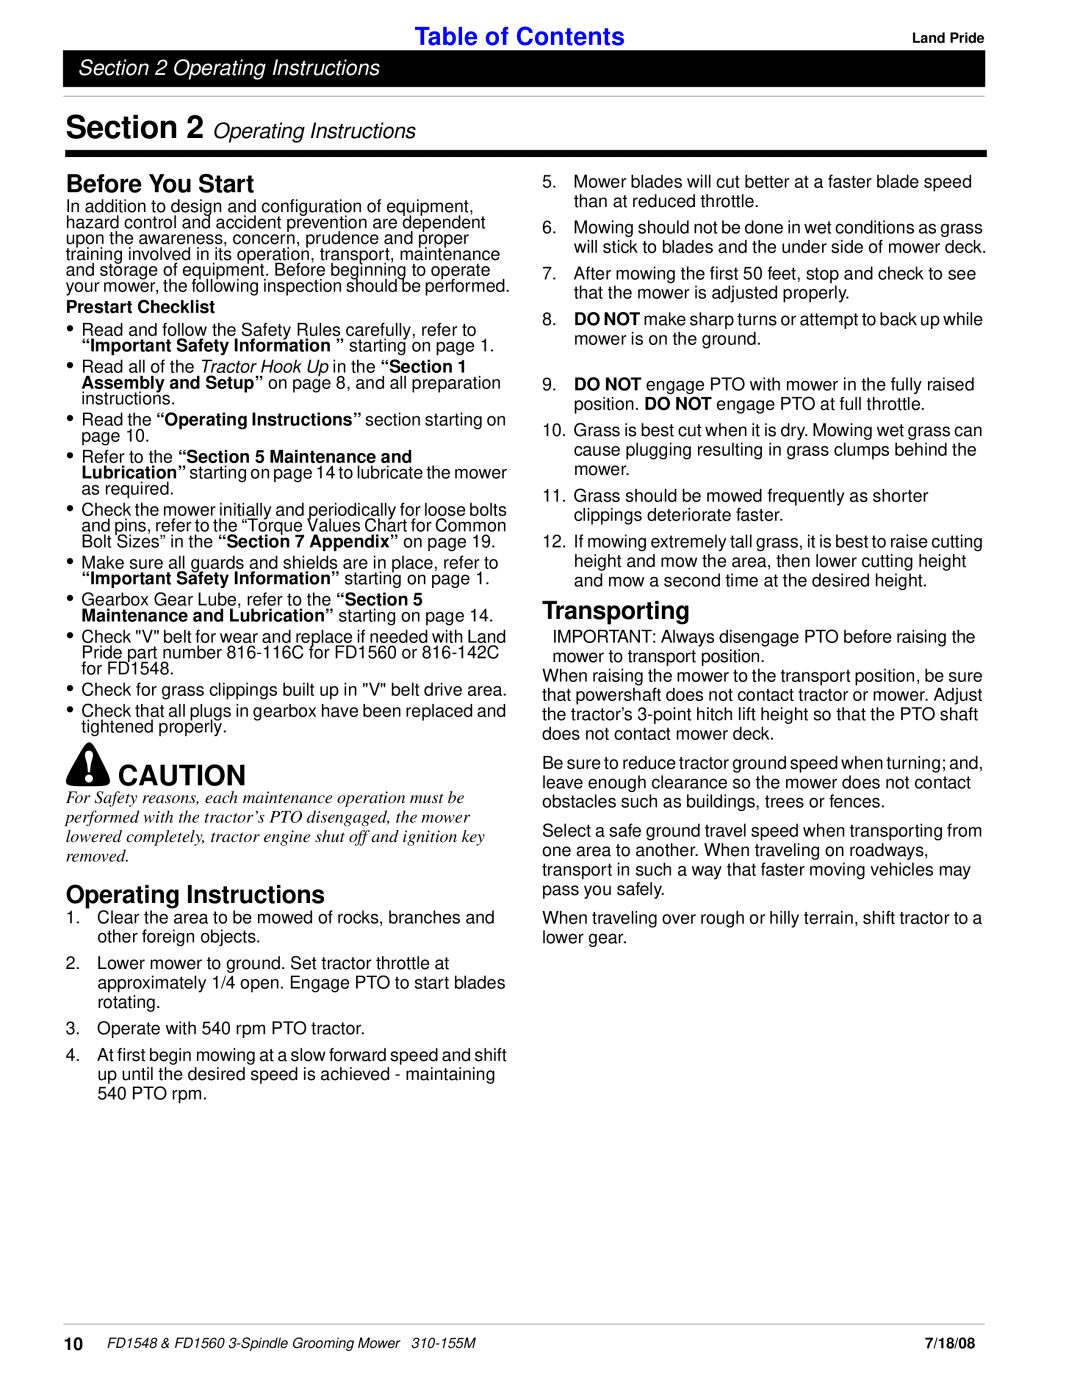 Land Pride fd1548 manual Before You Start, Operating Instructions, Transporting, Prestart Checklist, Table of Contents 